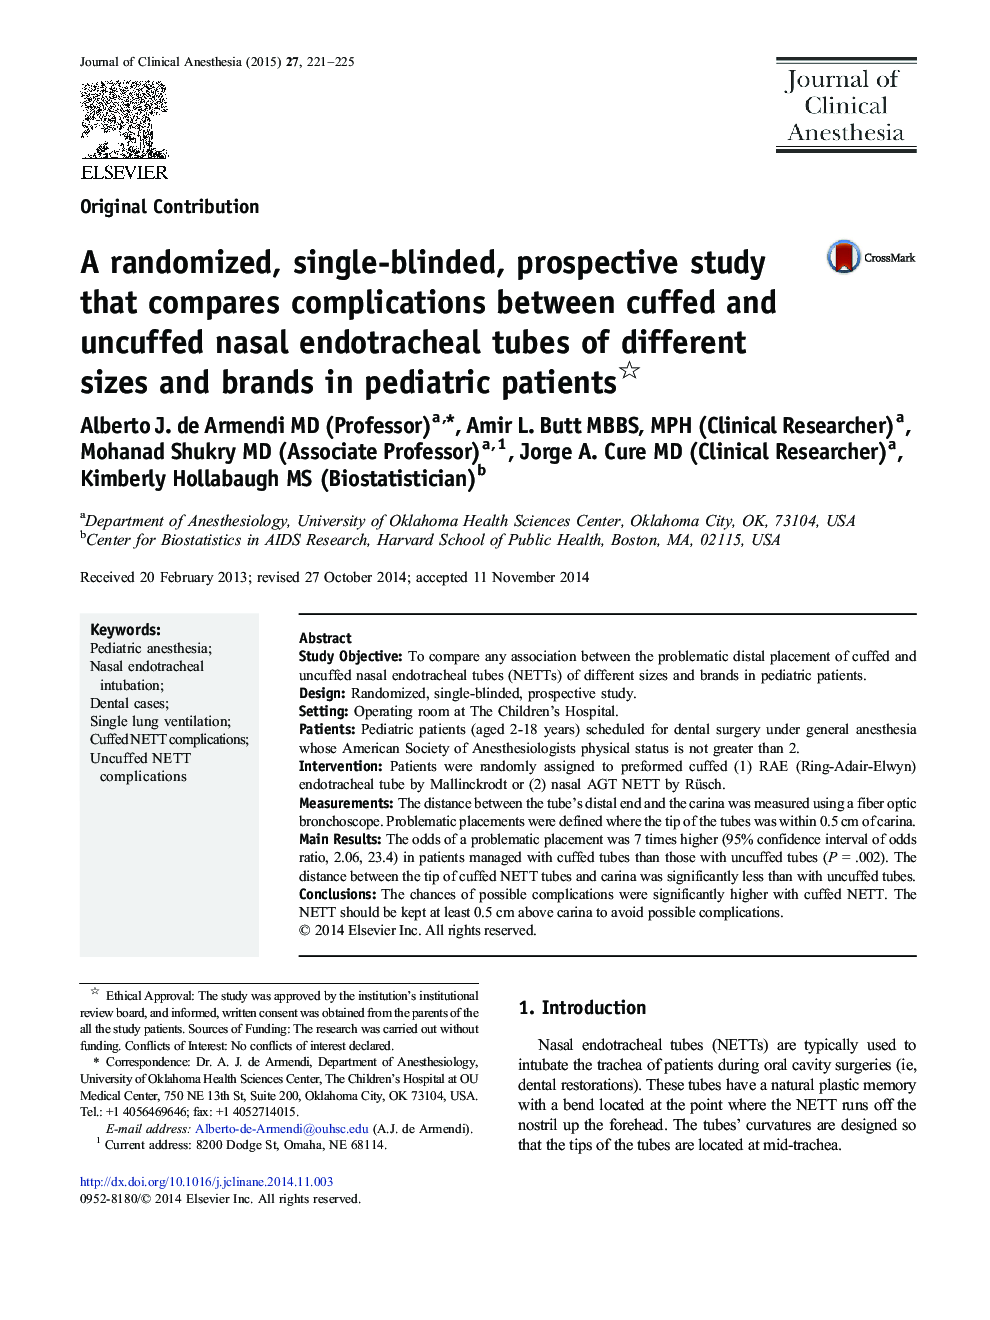 A randomized, single-blinded, prospective study that compares complications between cuffed and uncuffed nasal endotracheal tubes of different sizes and brands in pediatric patients 